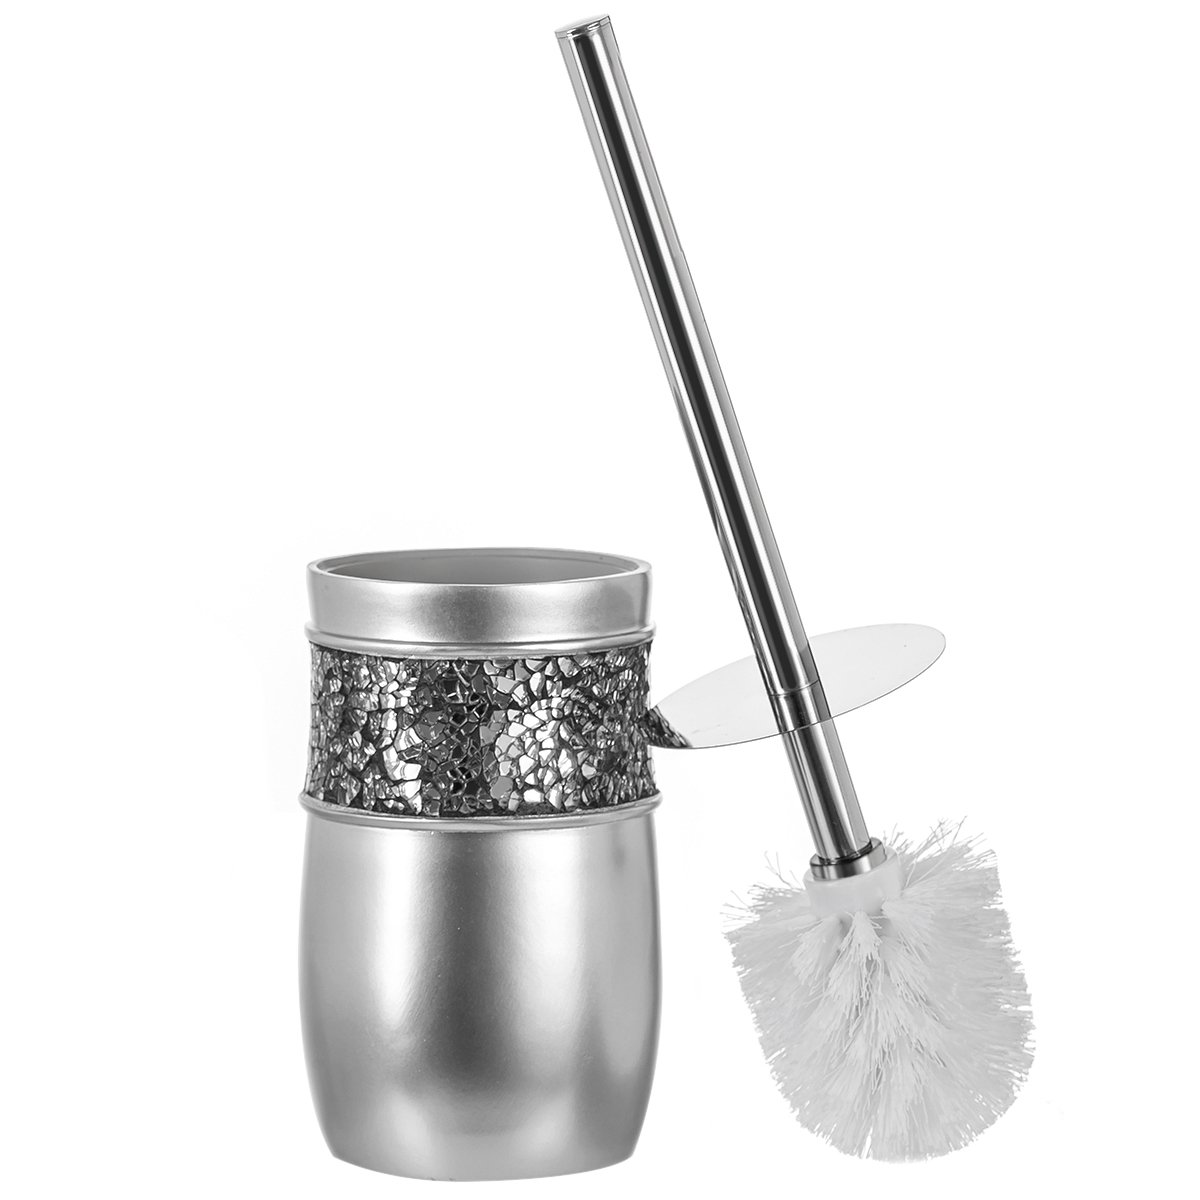 Book Cover Creative Scents Toilet Brush with Holder - Toilet Bowl Cleaner Brush and Holder - Good Grip, Deep Cleaning, Decorative Design Compact Toilet Bowl Scrubber (Silver)